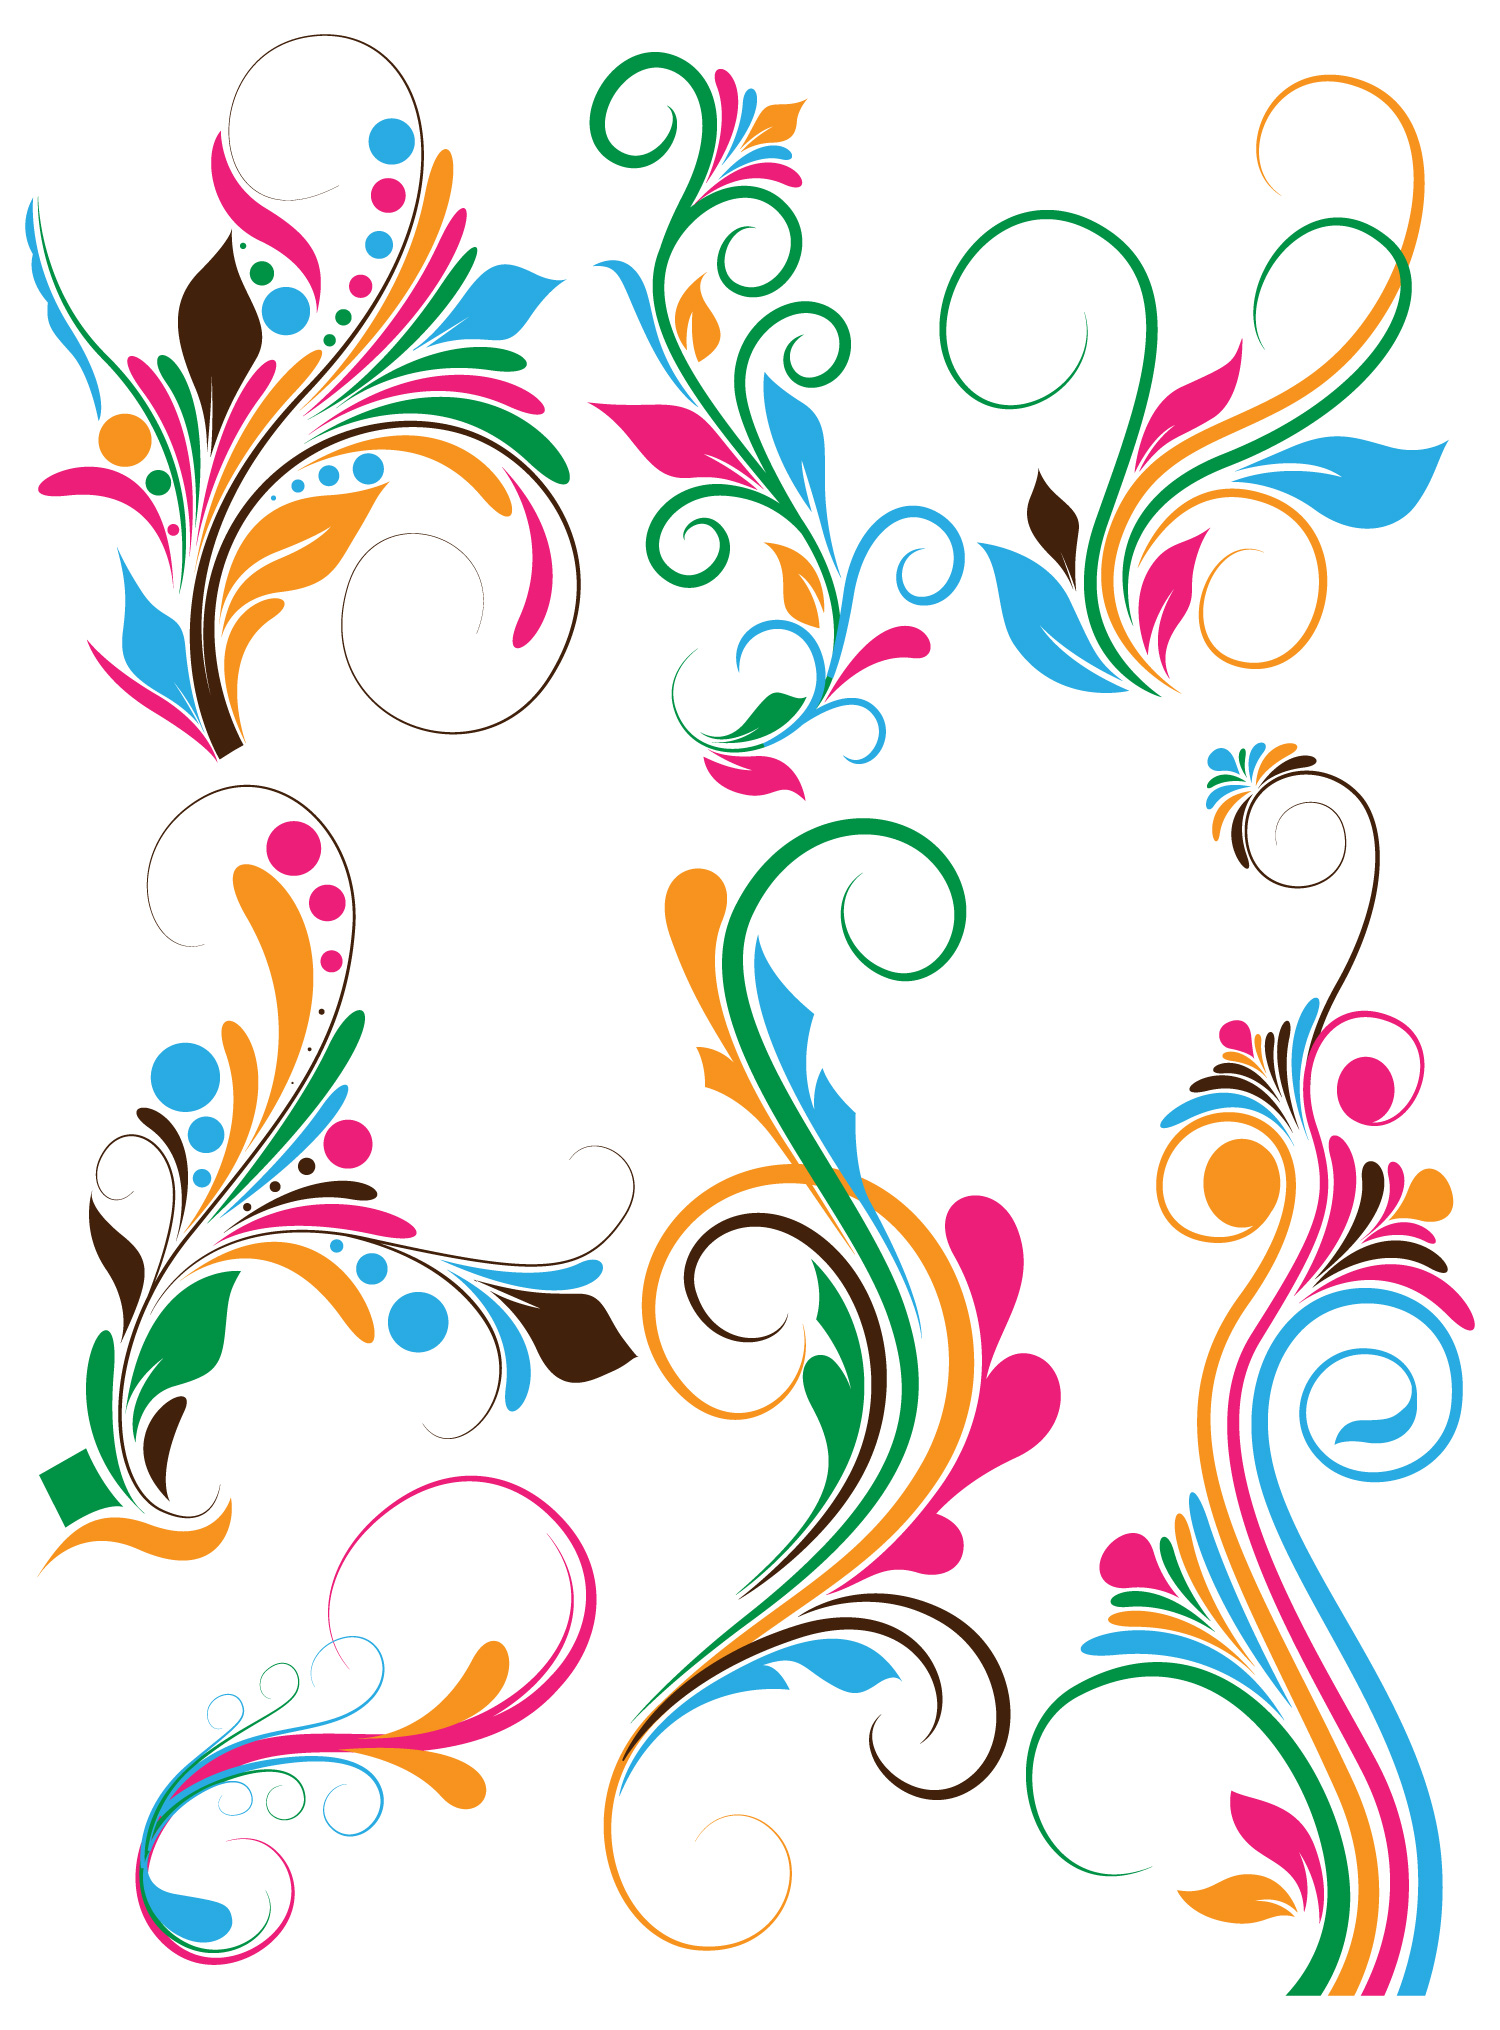 Swirl Designs Png | Free download on ClipArtMag